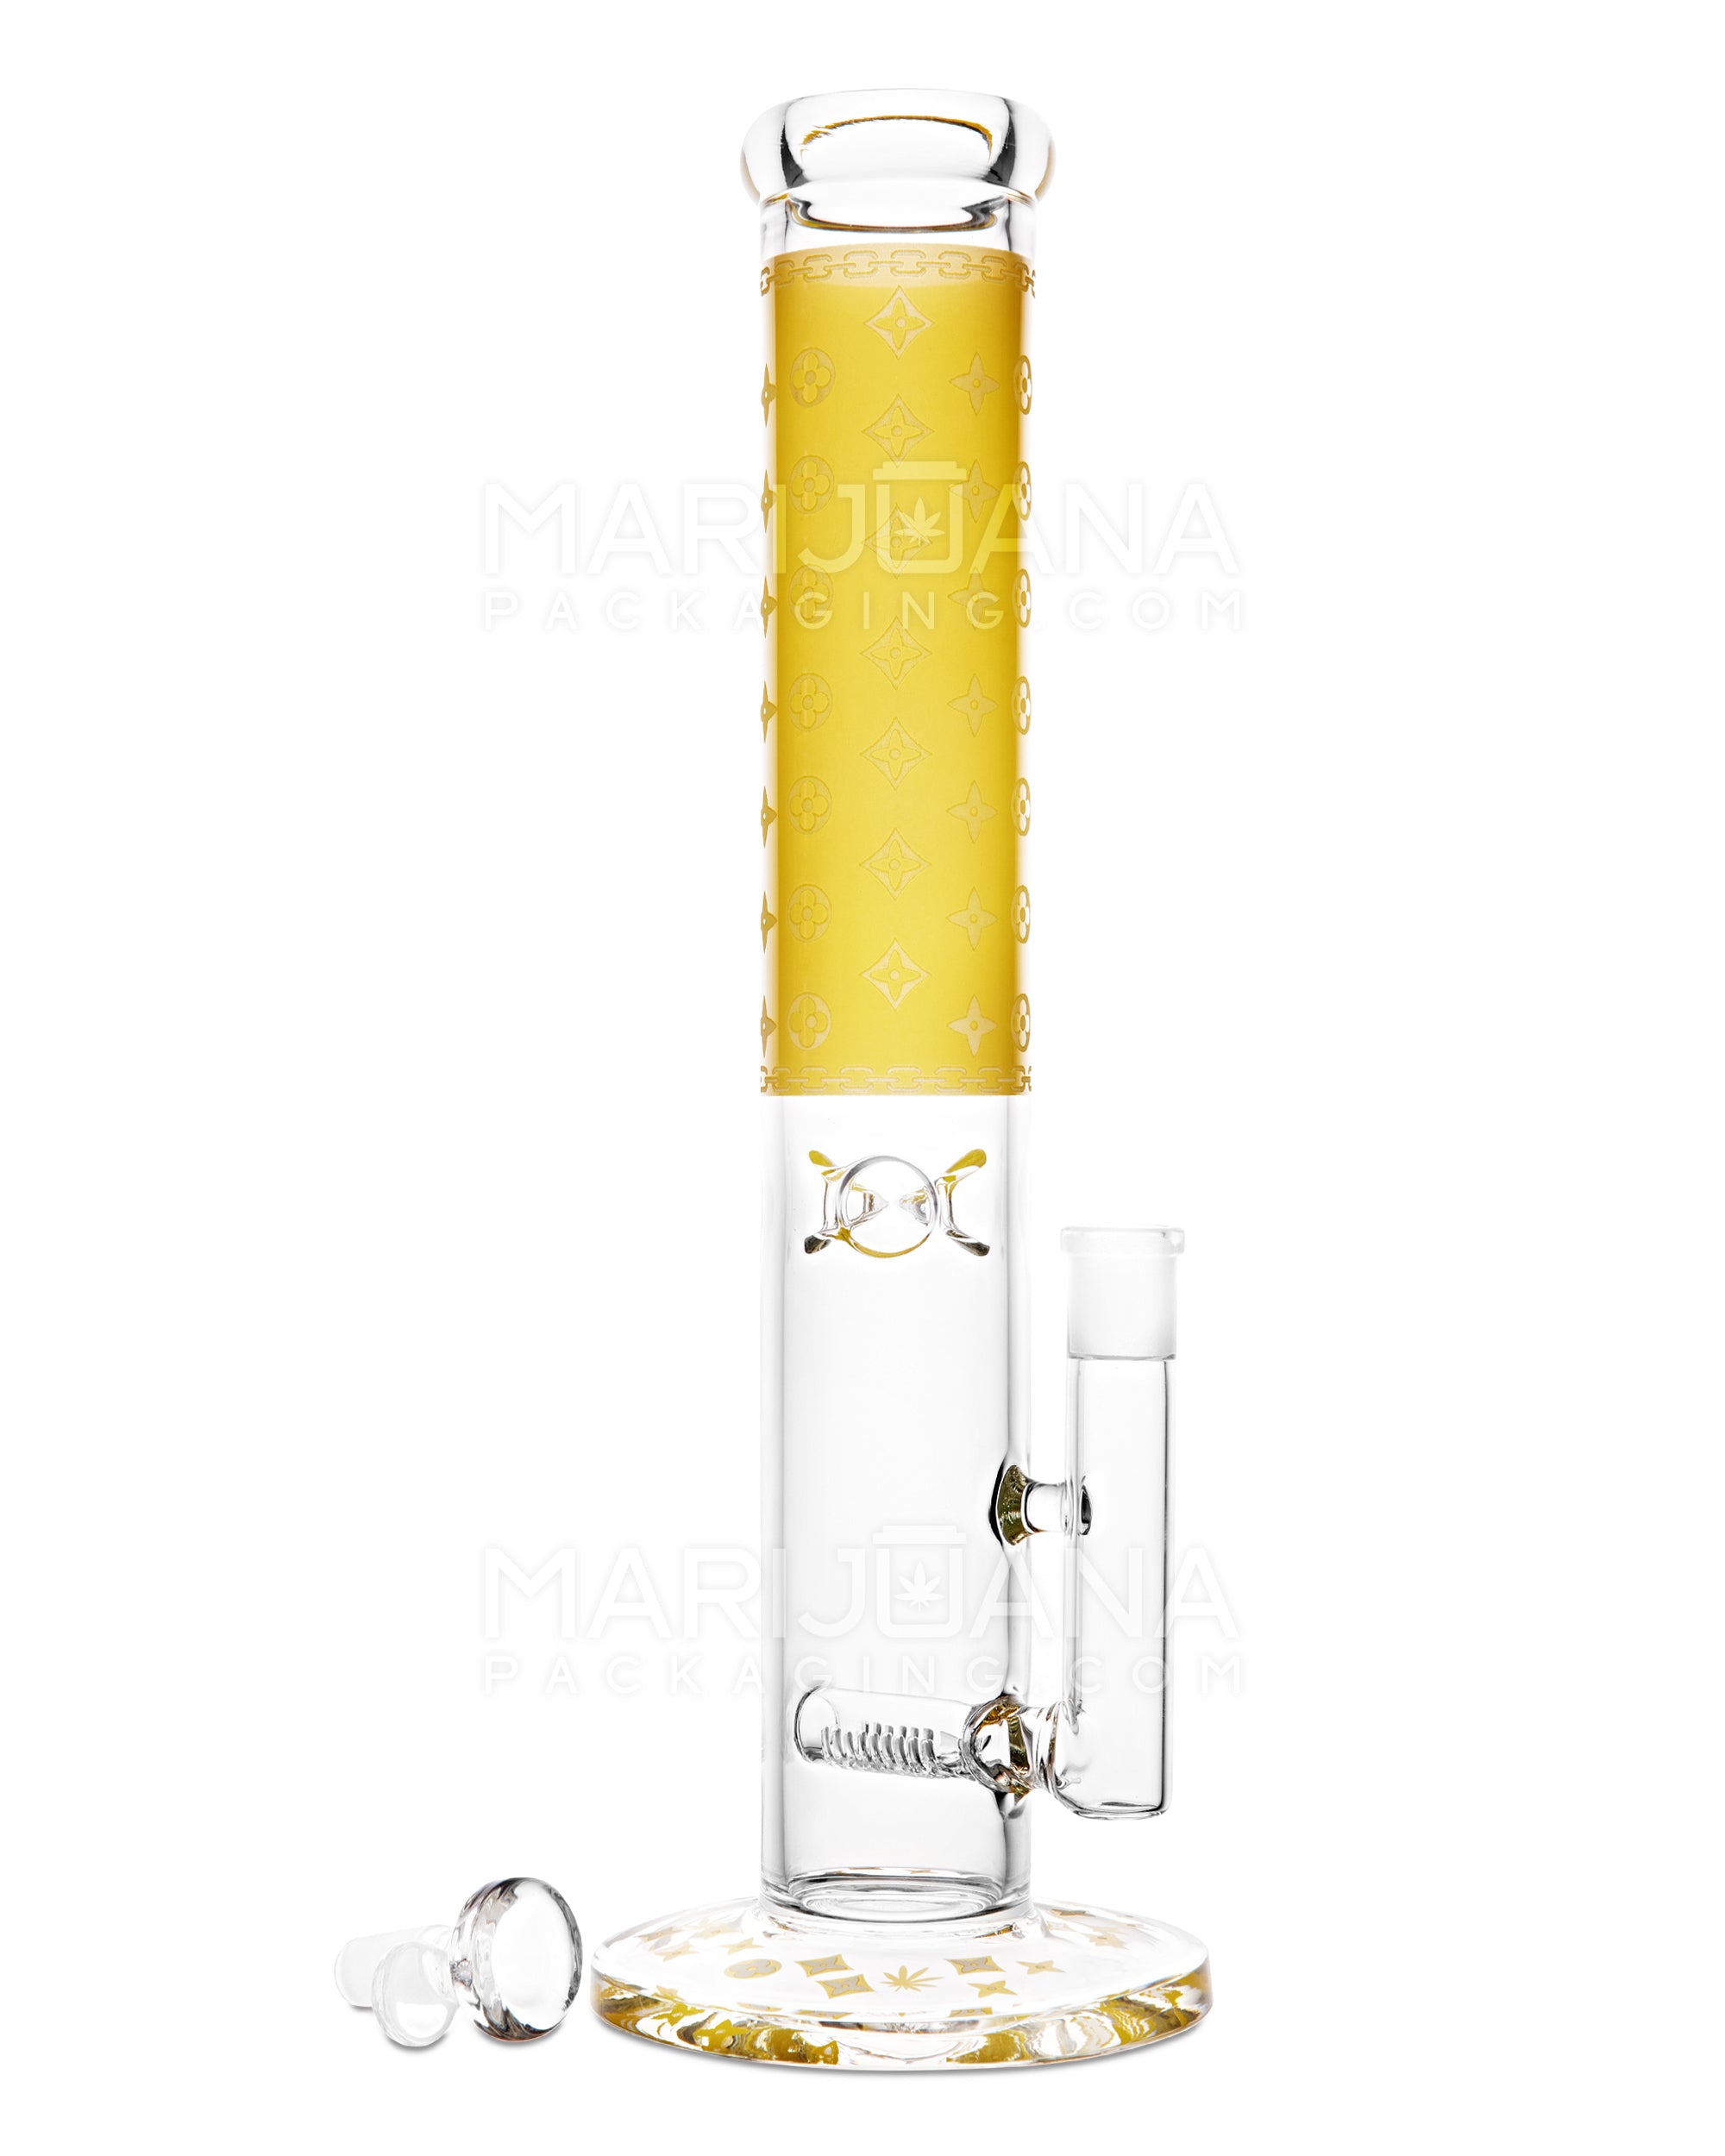 Straight Neck Luxury Design Inline Perc Glass Water Pipe w/ Ice Catcher | 14in Tall - 14mm Bowl - Yellow - 2